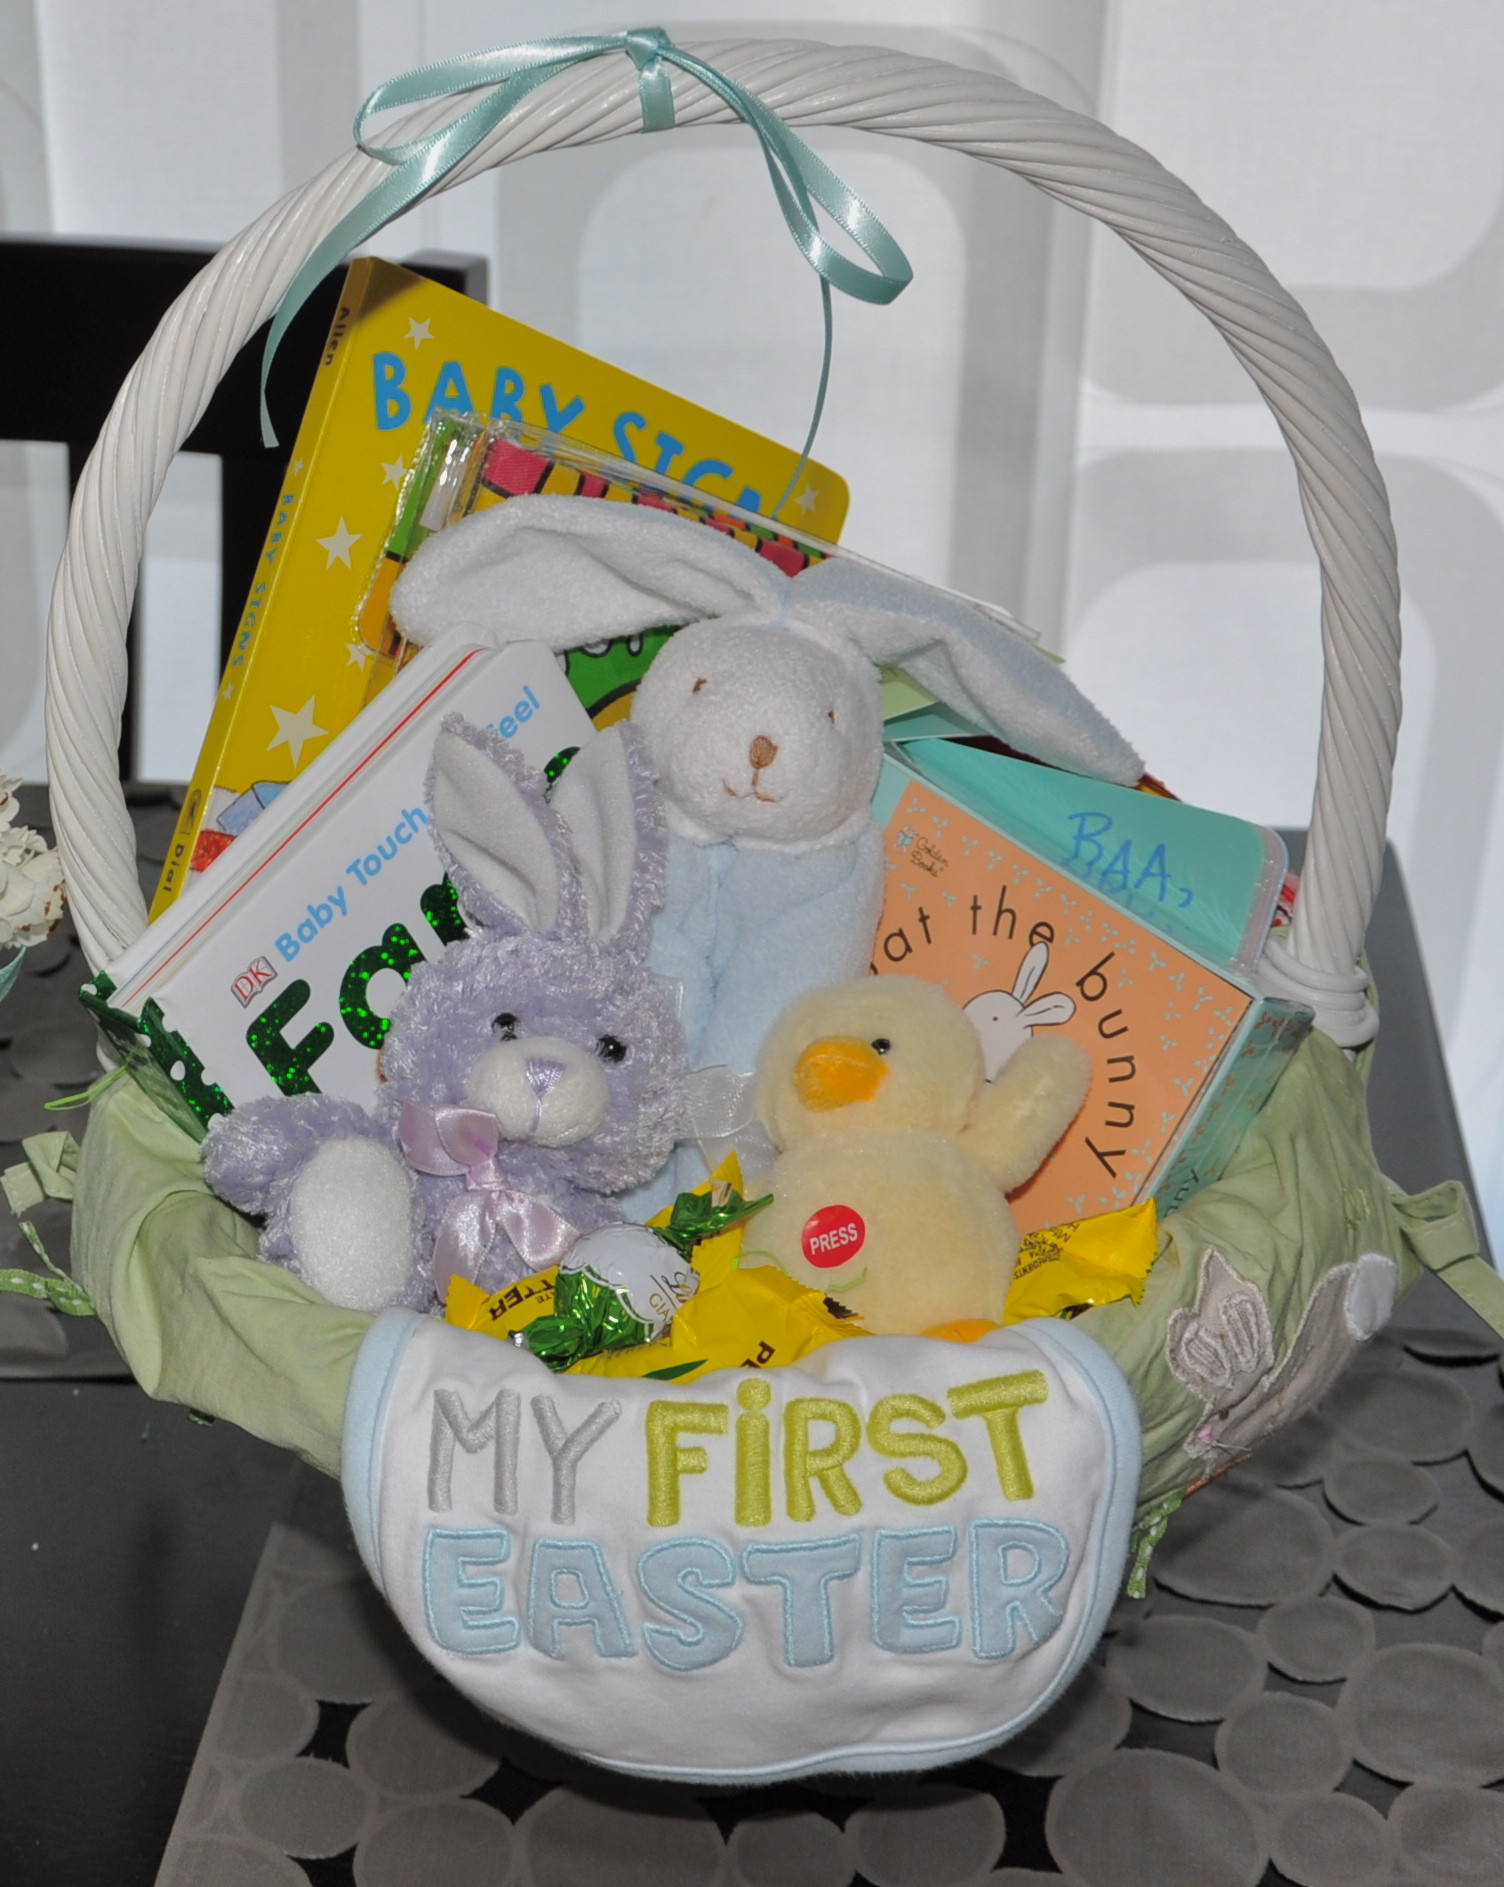 Baby First Easter Basket Ideas
 Baby s First Easter Basket